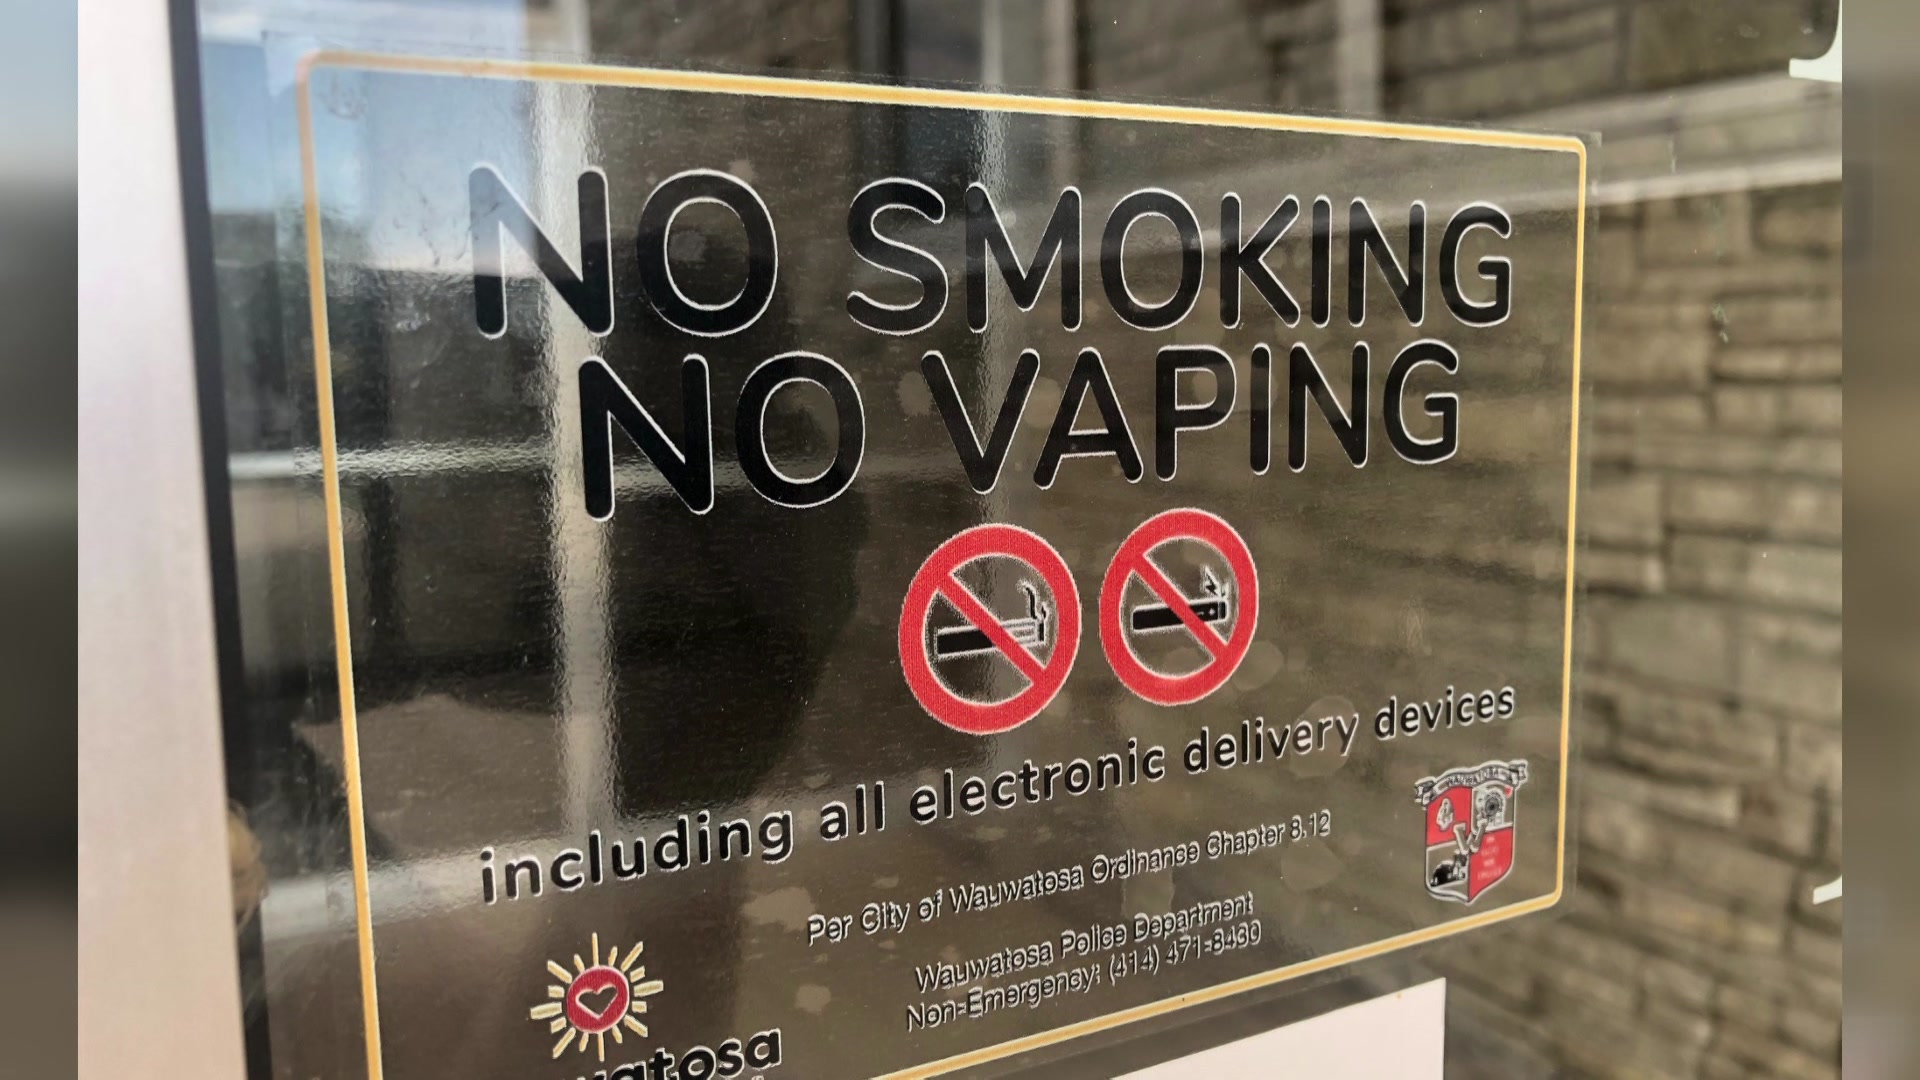 e-cigarettes, vaping in smoke-free air law